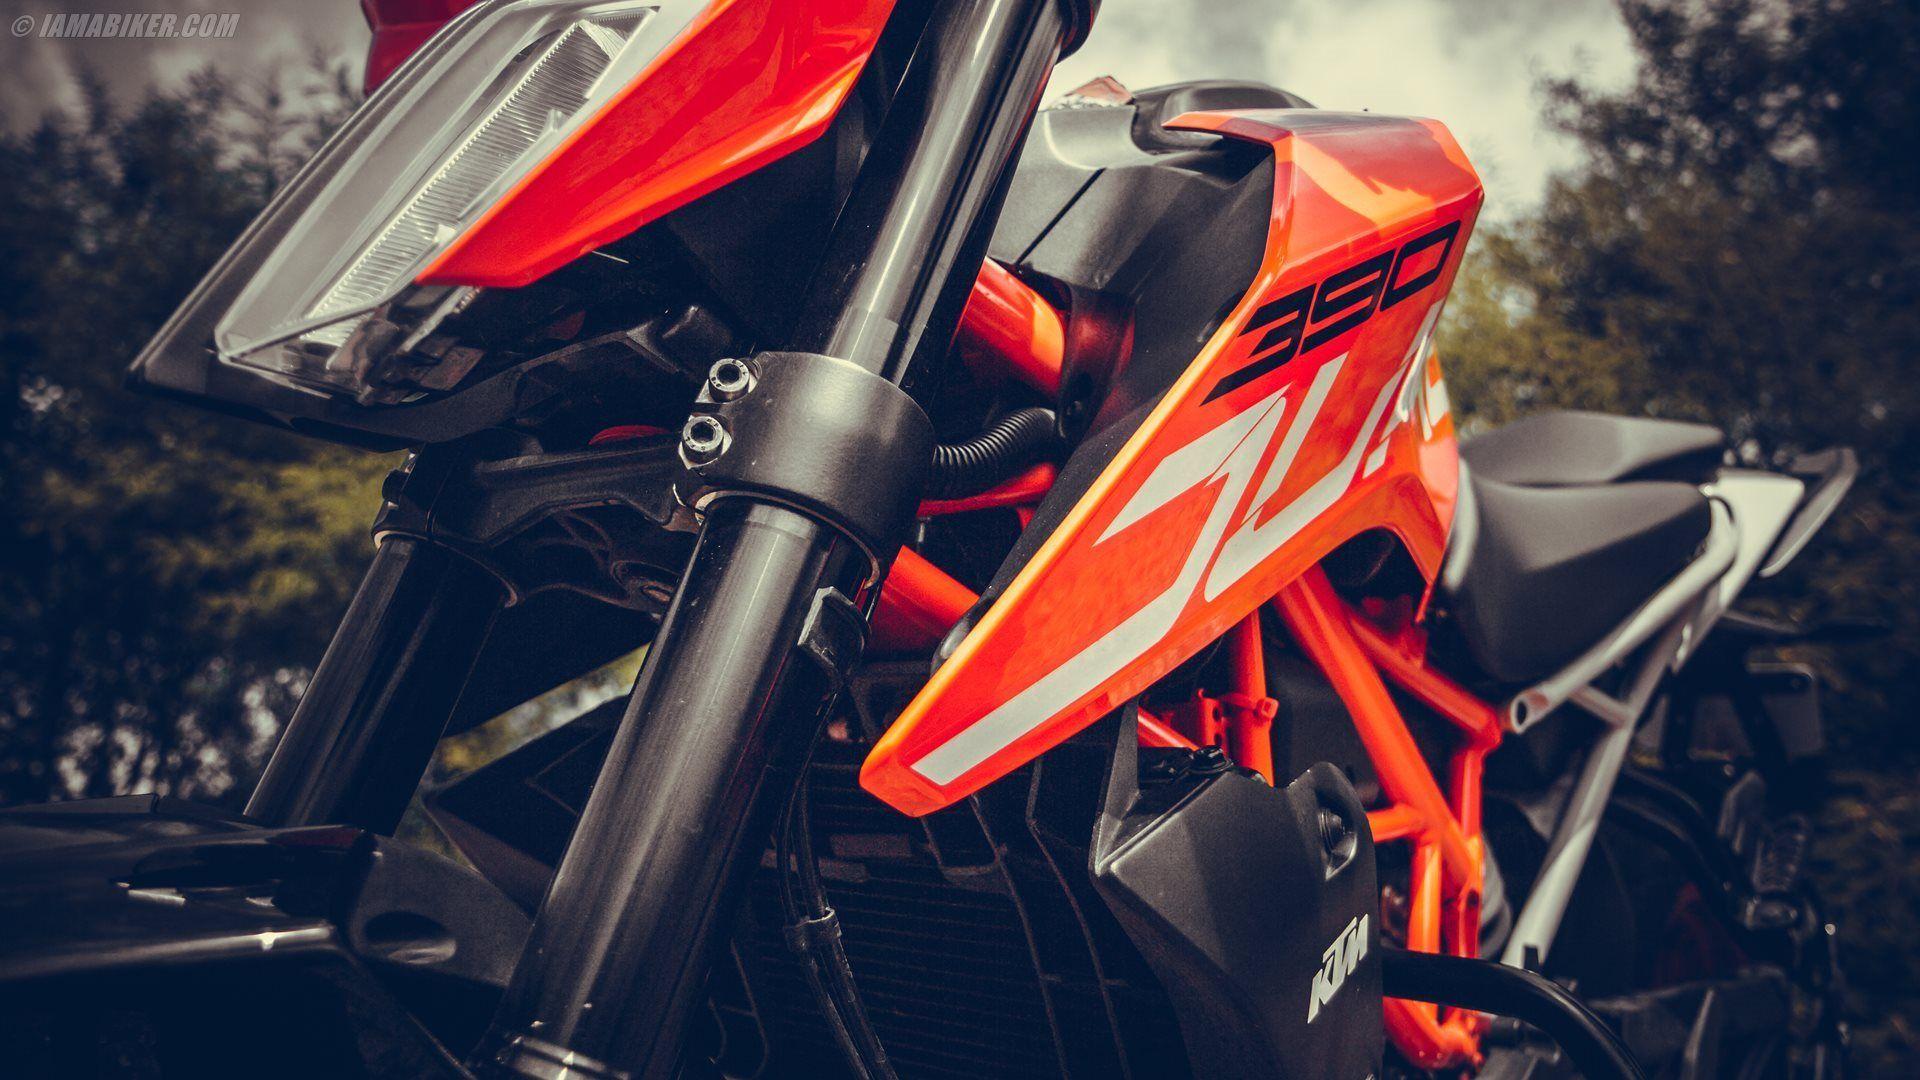 Ktm 390 Photos Download The BEST Free Ktm 390 Stock Photos  HD Images